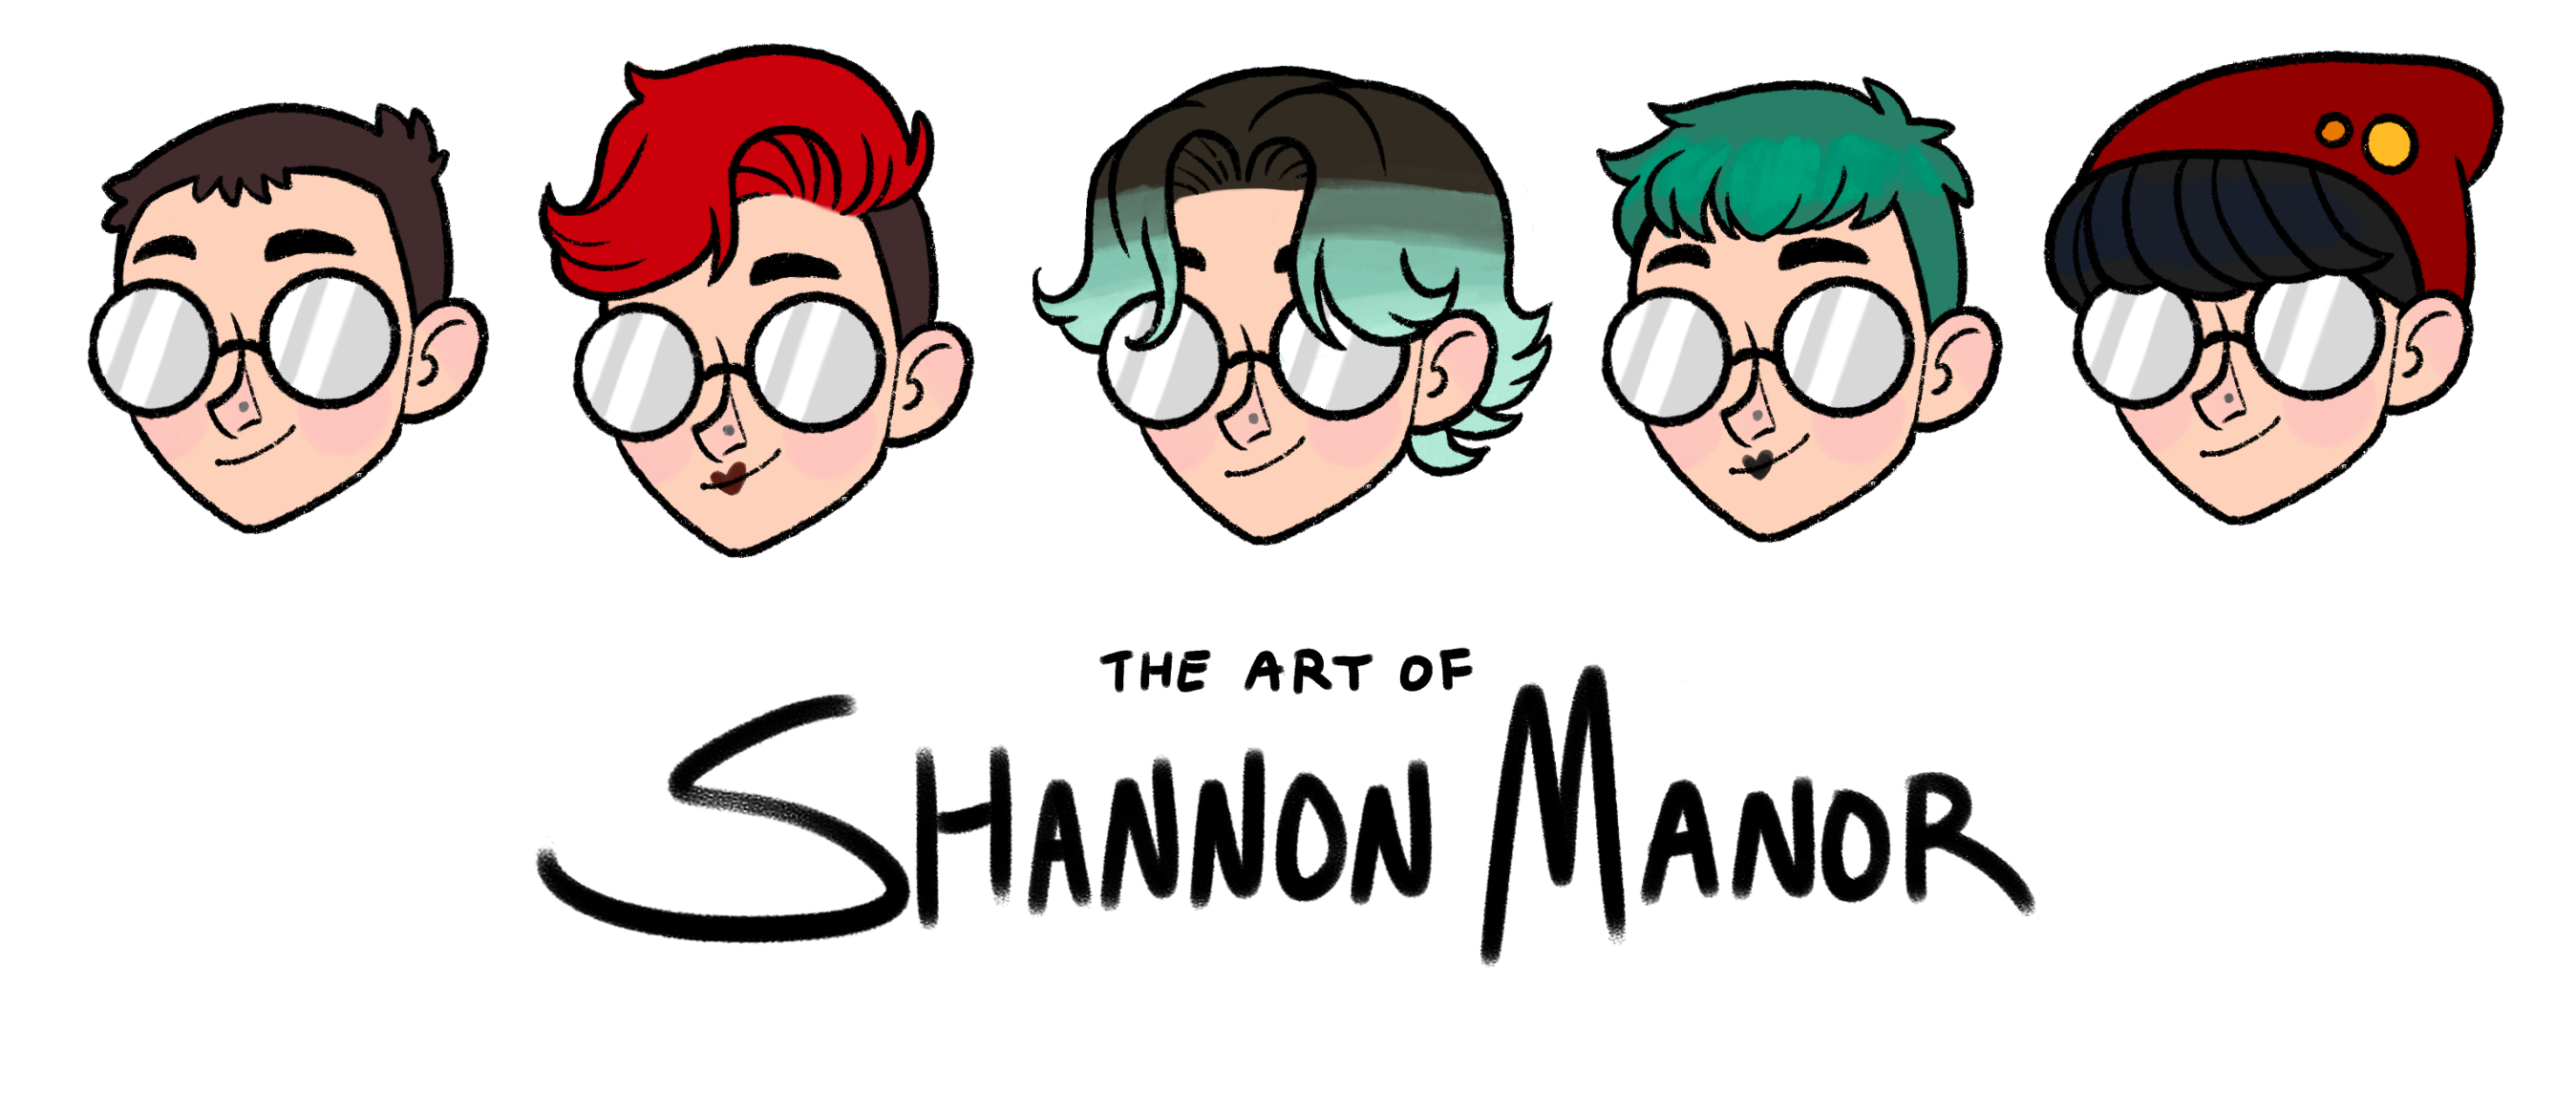 The Art of Shannon Manor